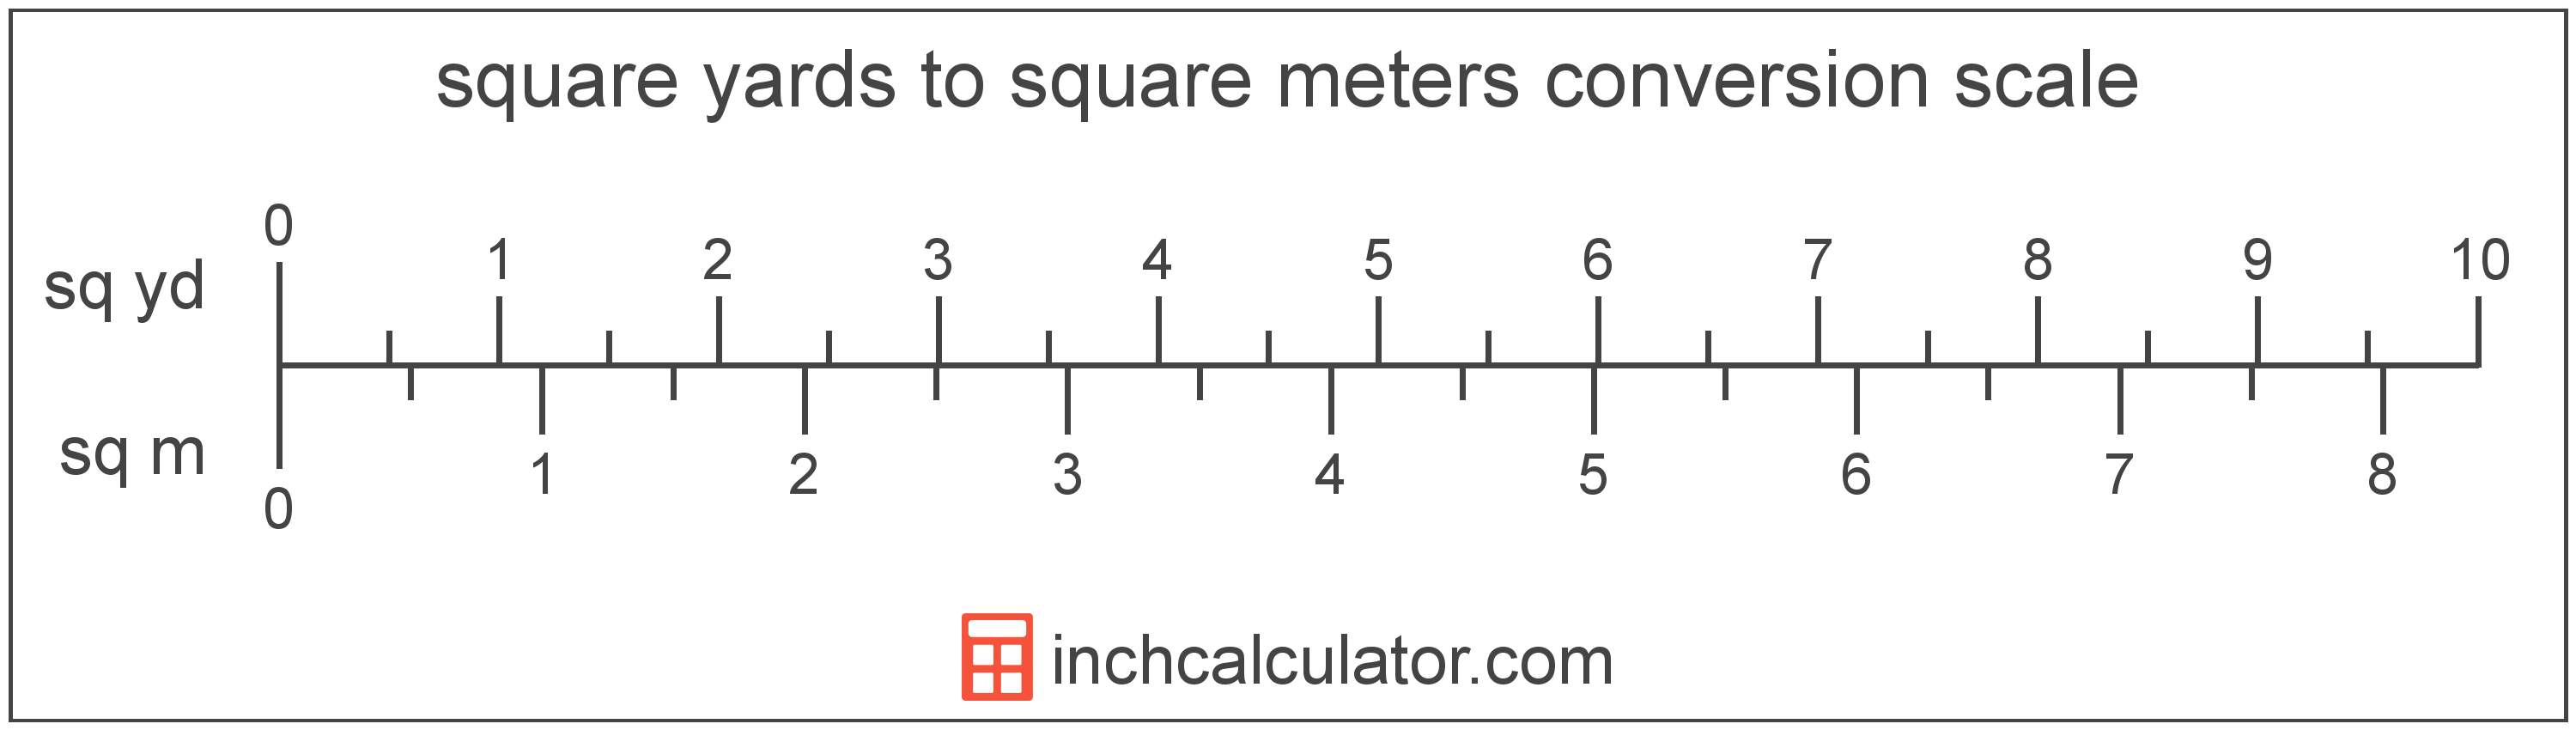 conversion scale showing square yards and equivalent square meters area values